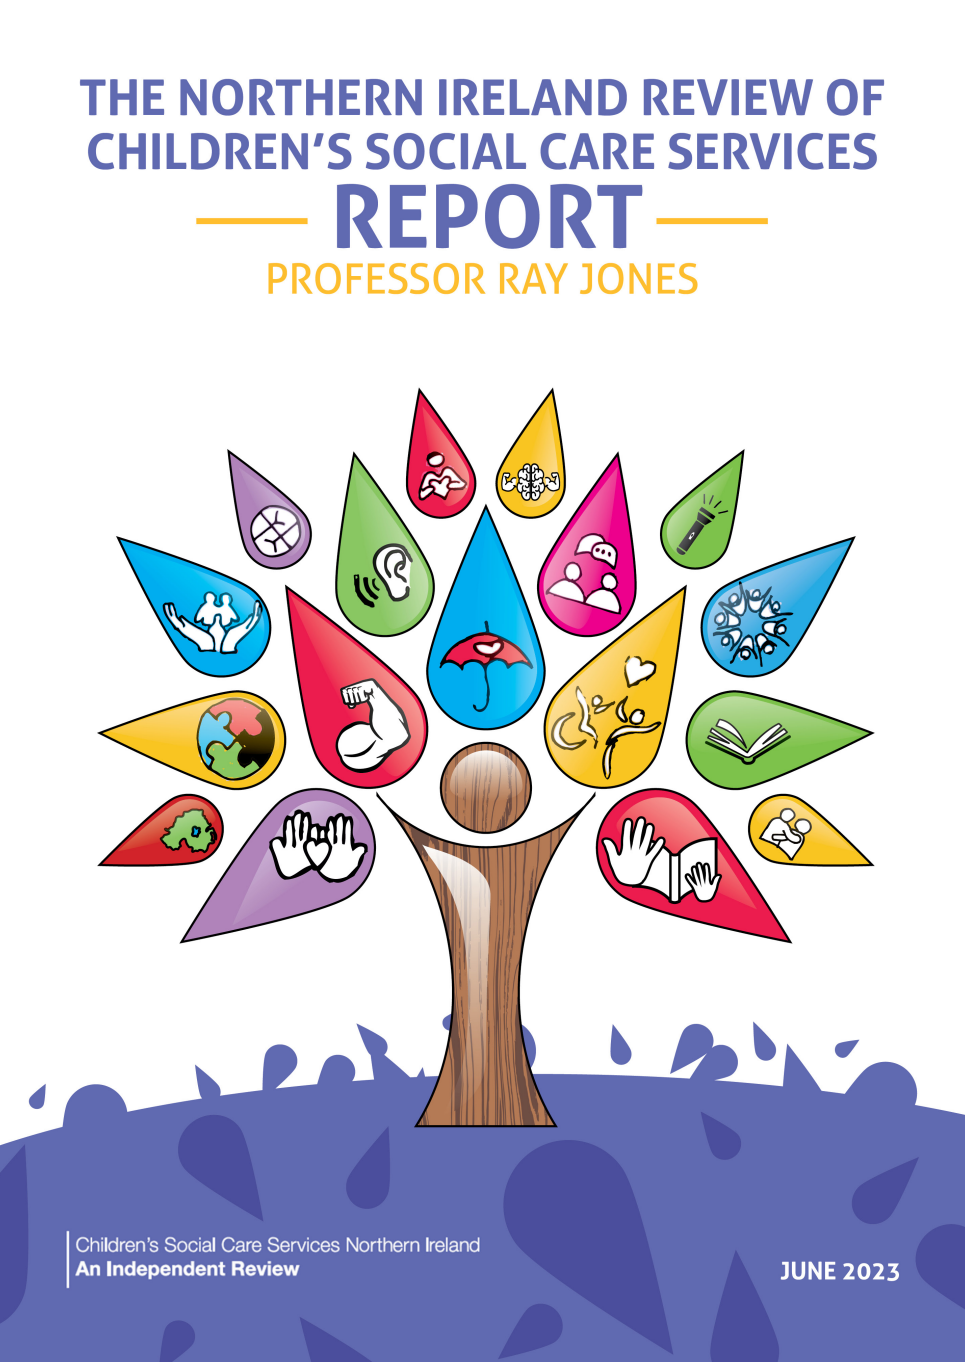 Front cover of the NI Review of Children's Social Care Services Report. Features a tree whose trunk looks like a person and colourful teardrops with symbols inside that denote the leaves.